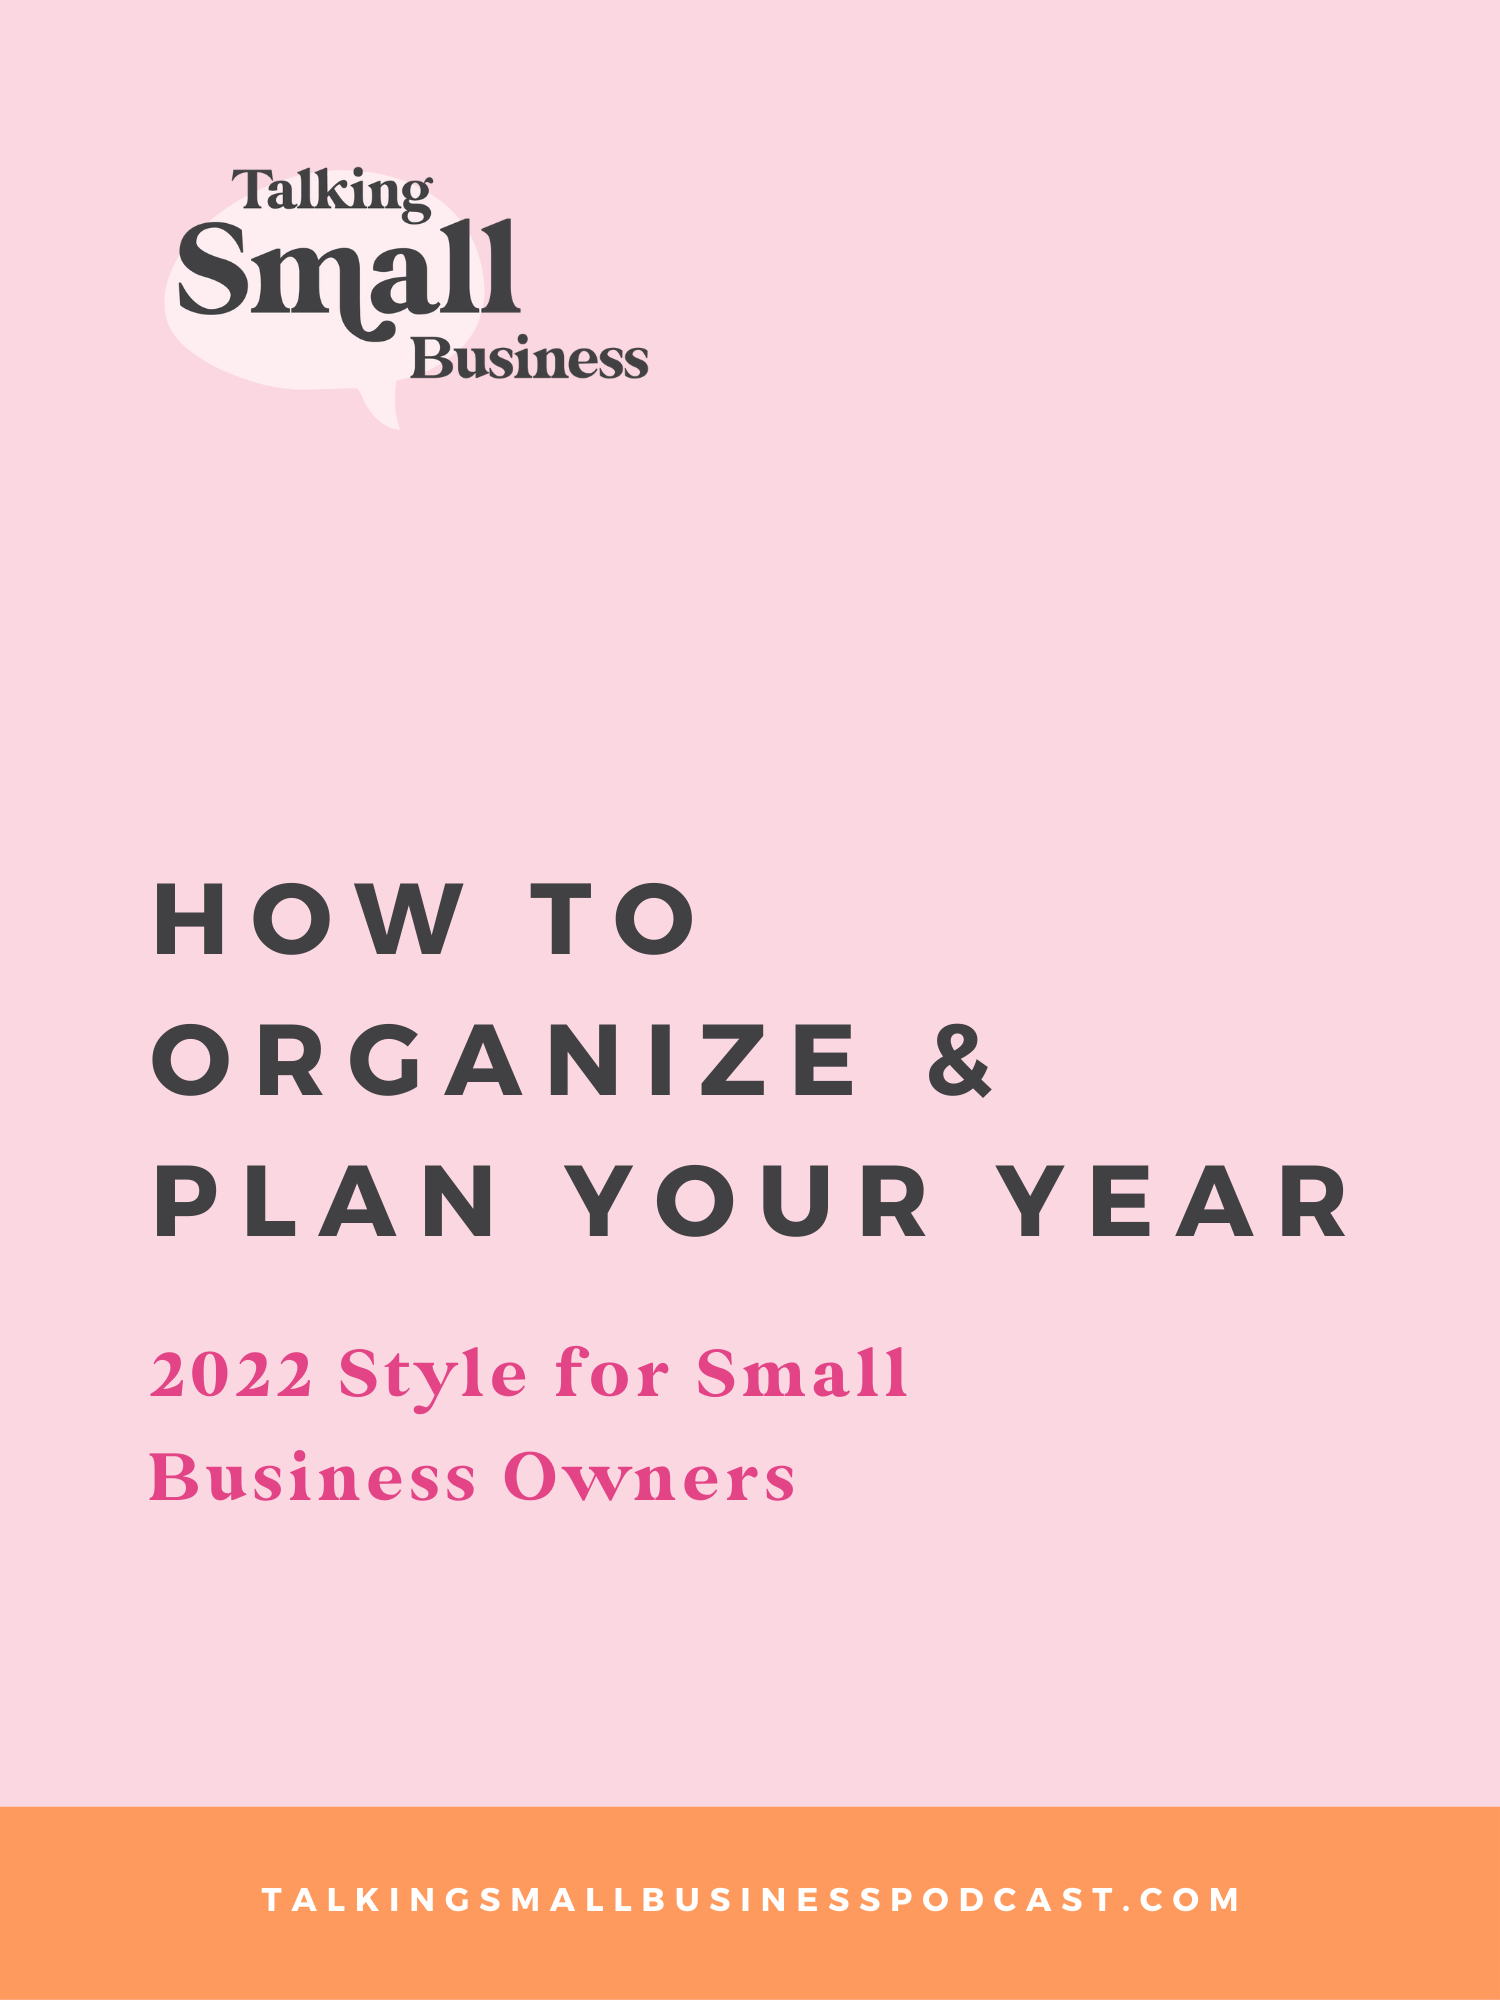 Yearly Planning for Small Business Owners: How to Organize and Plan Your Year, tips shared on Talking Small Business